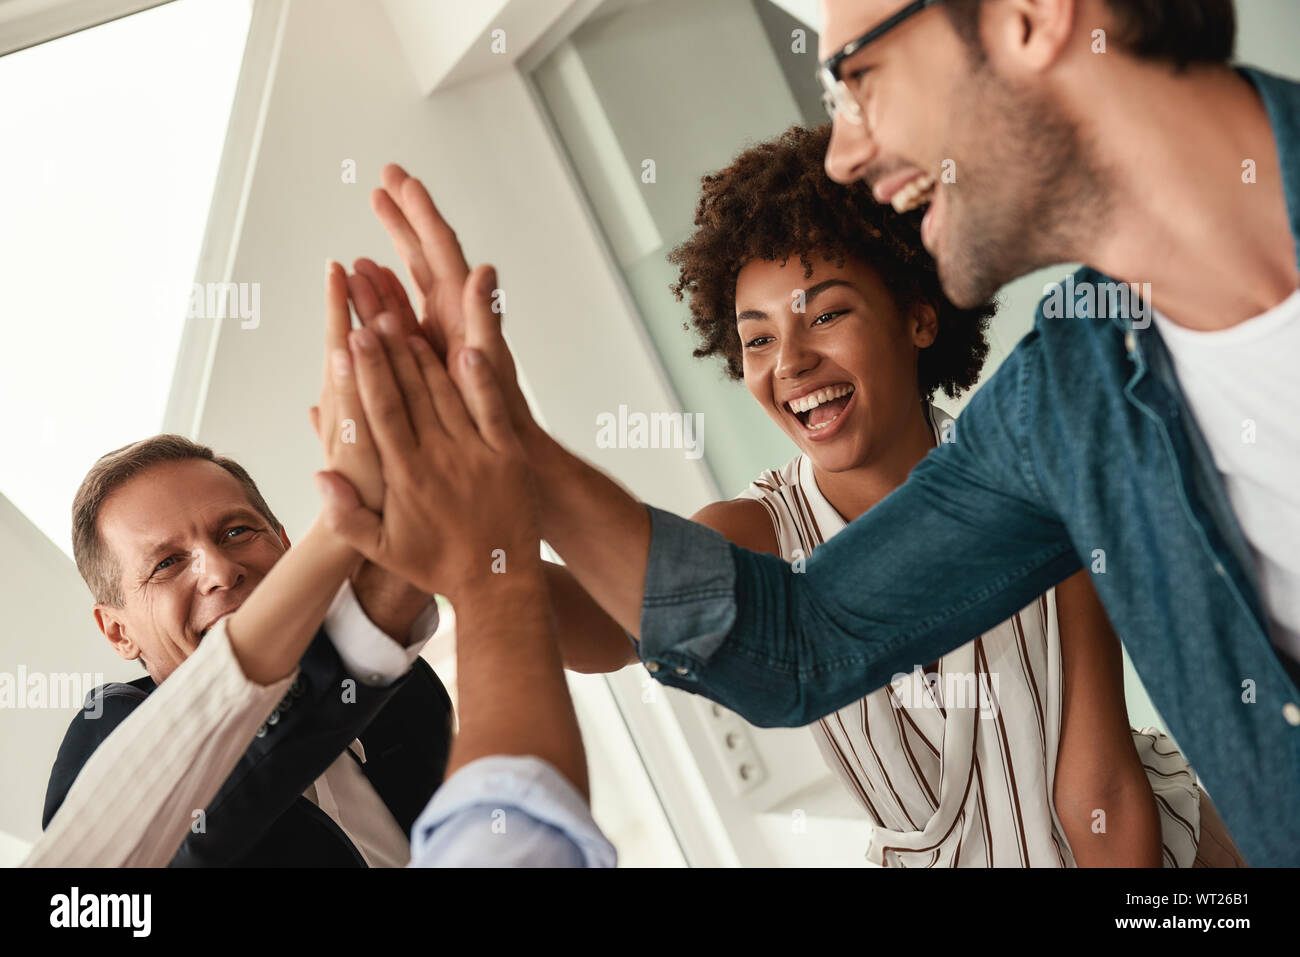 Celebrating success. Business people giving each other high-five and smiling while working together in the modern office. Teamwork Stock Photo